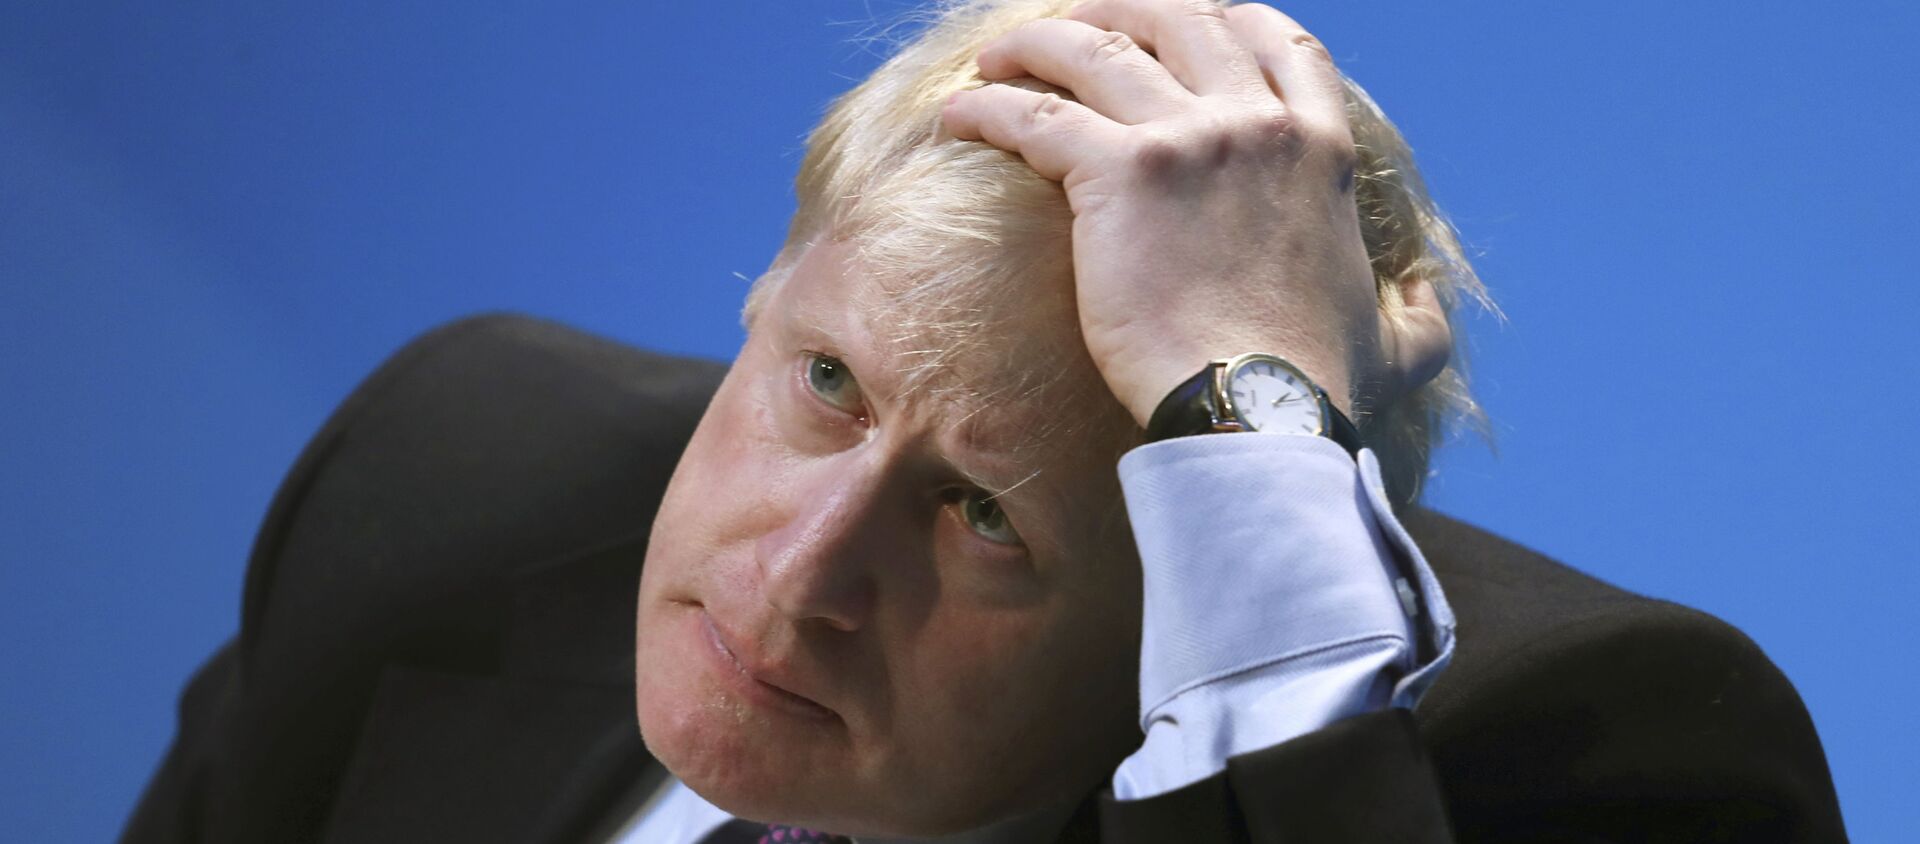 Britain's Conservative party leadership candidate Boris Johnson gestures during the first party hustings at the ICC in Birmingham, England, Saturday June 22, 2019 - Sputnik International, 1920, 19.06.2021